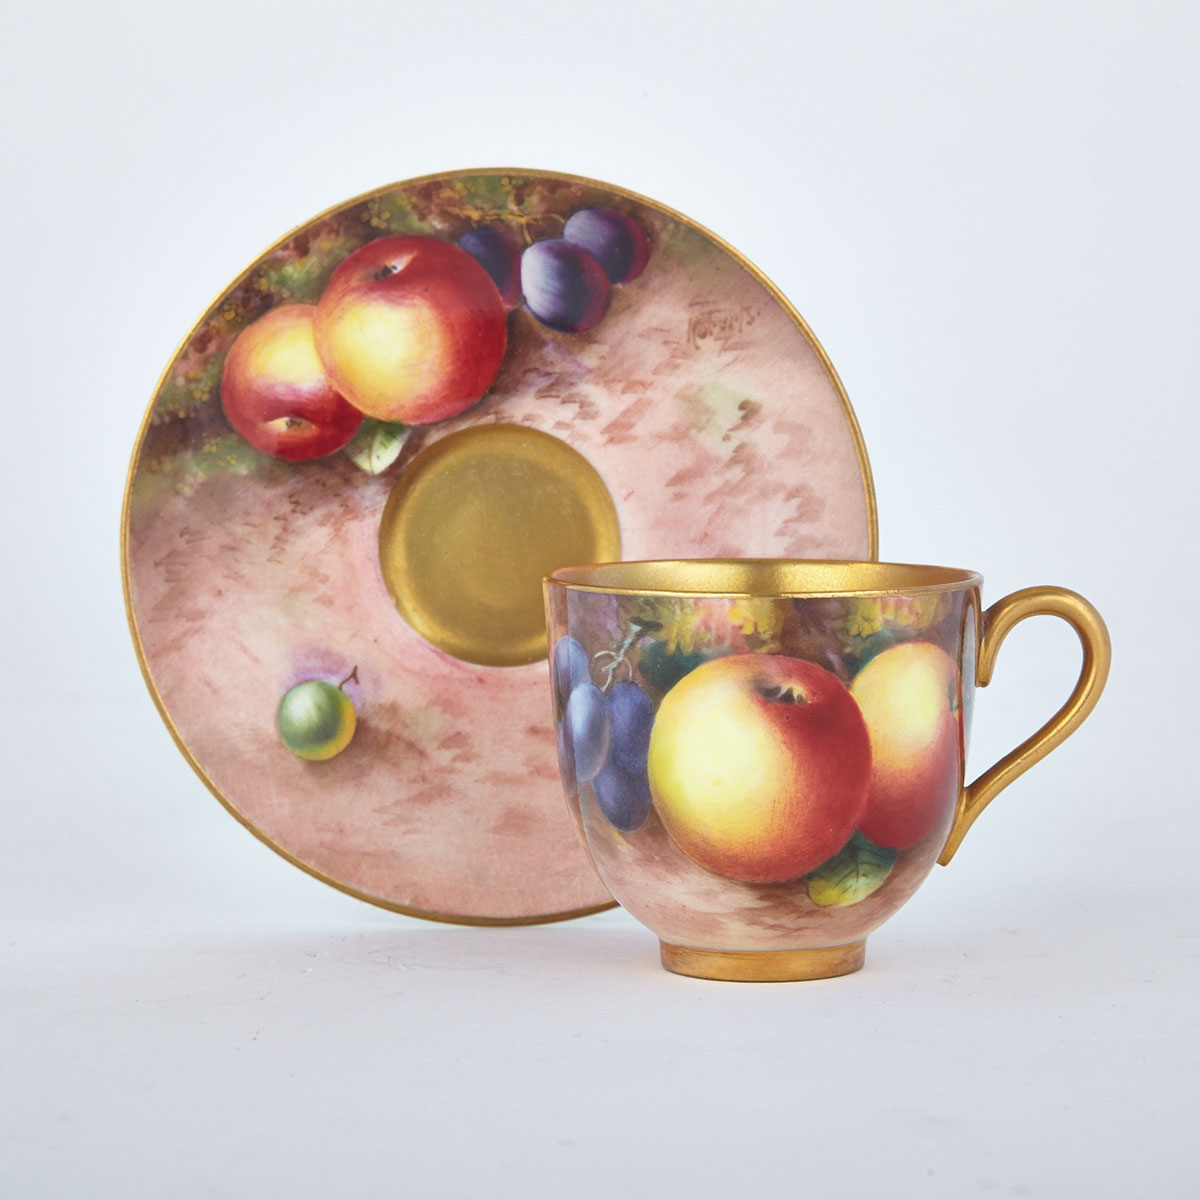 Royal Worcester Demi-Tasse Cup and Saucer, Harry Ayrton and William Roberts, 20th century